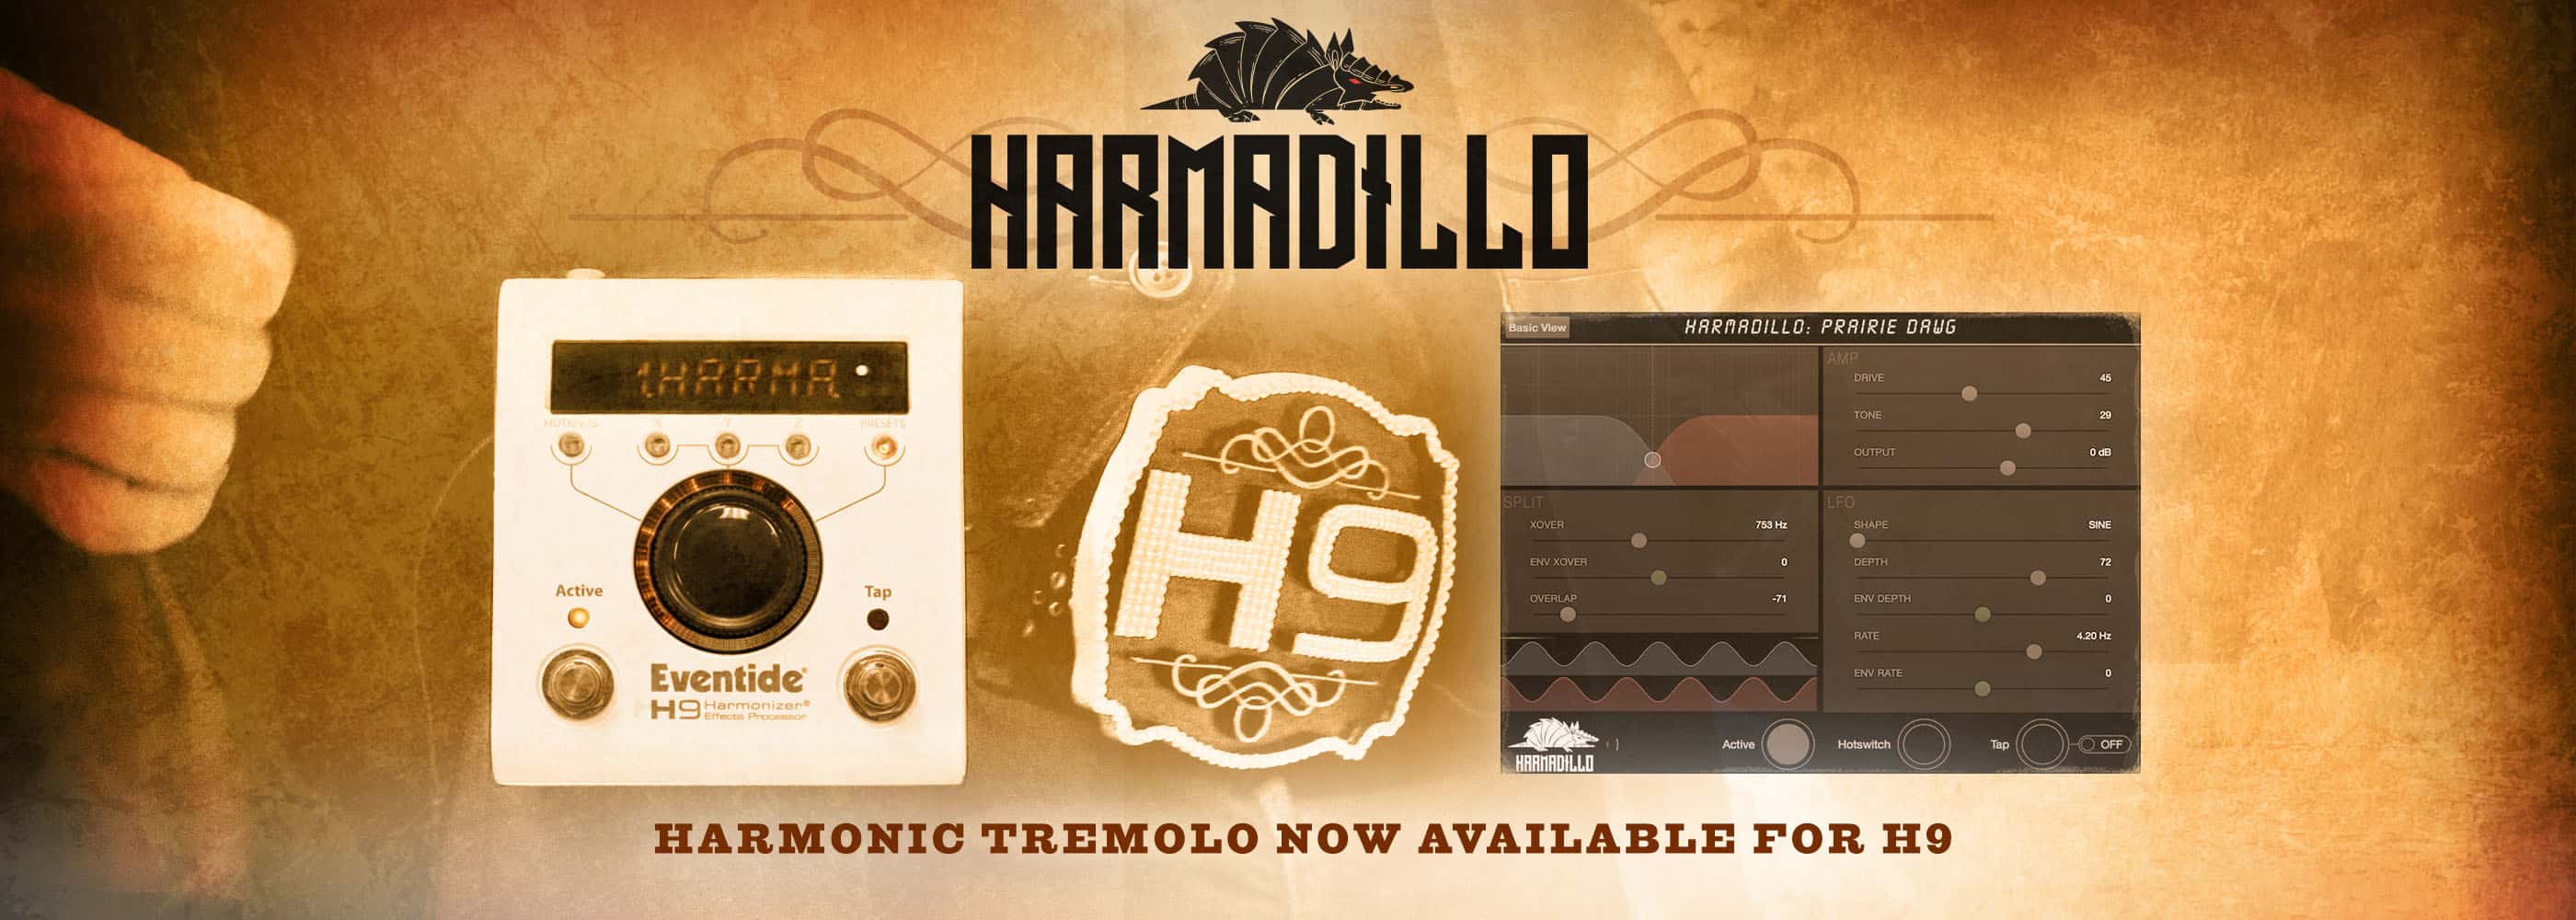 Eventide’s H9 Harmonizer® adds its 51st effect, “Harmadillo” a mind-bending harmonic tremolo tuned for guitar and bass